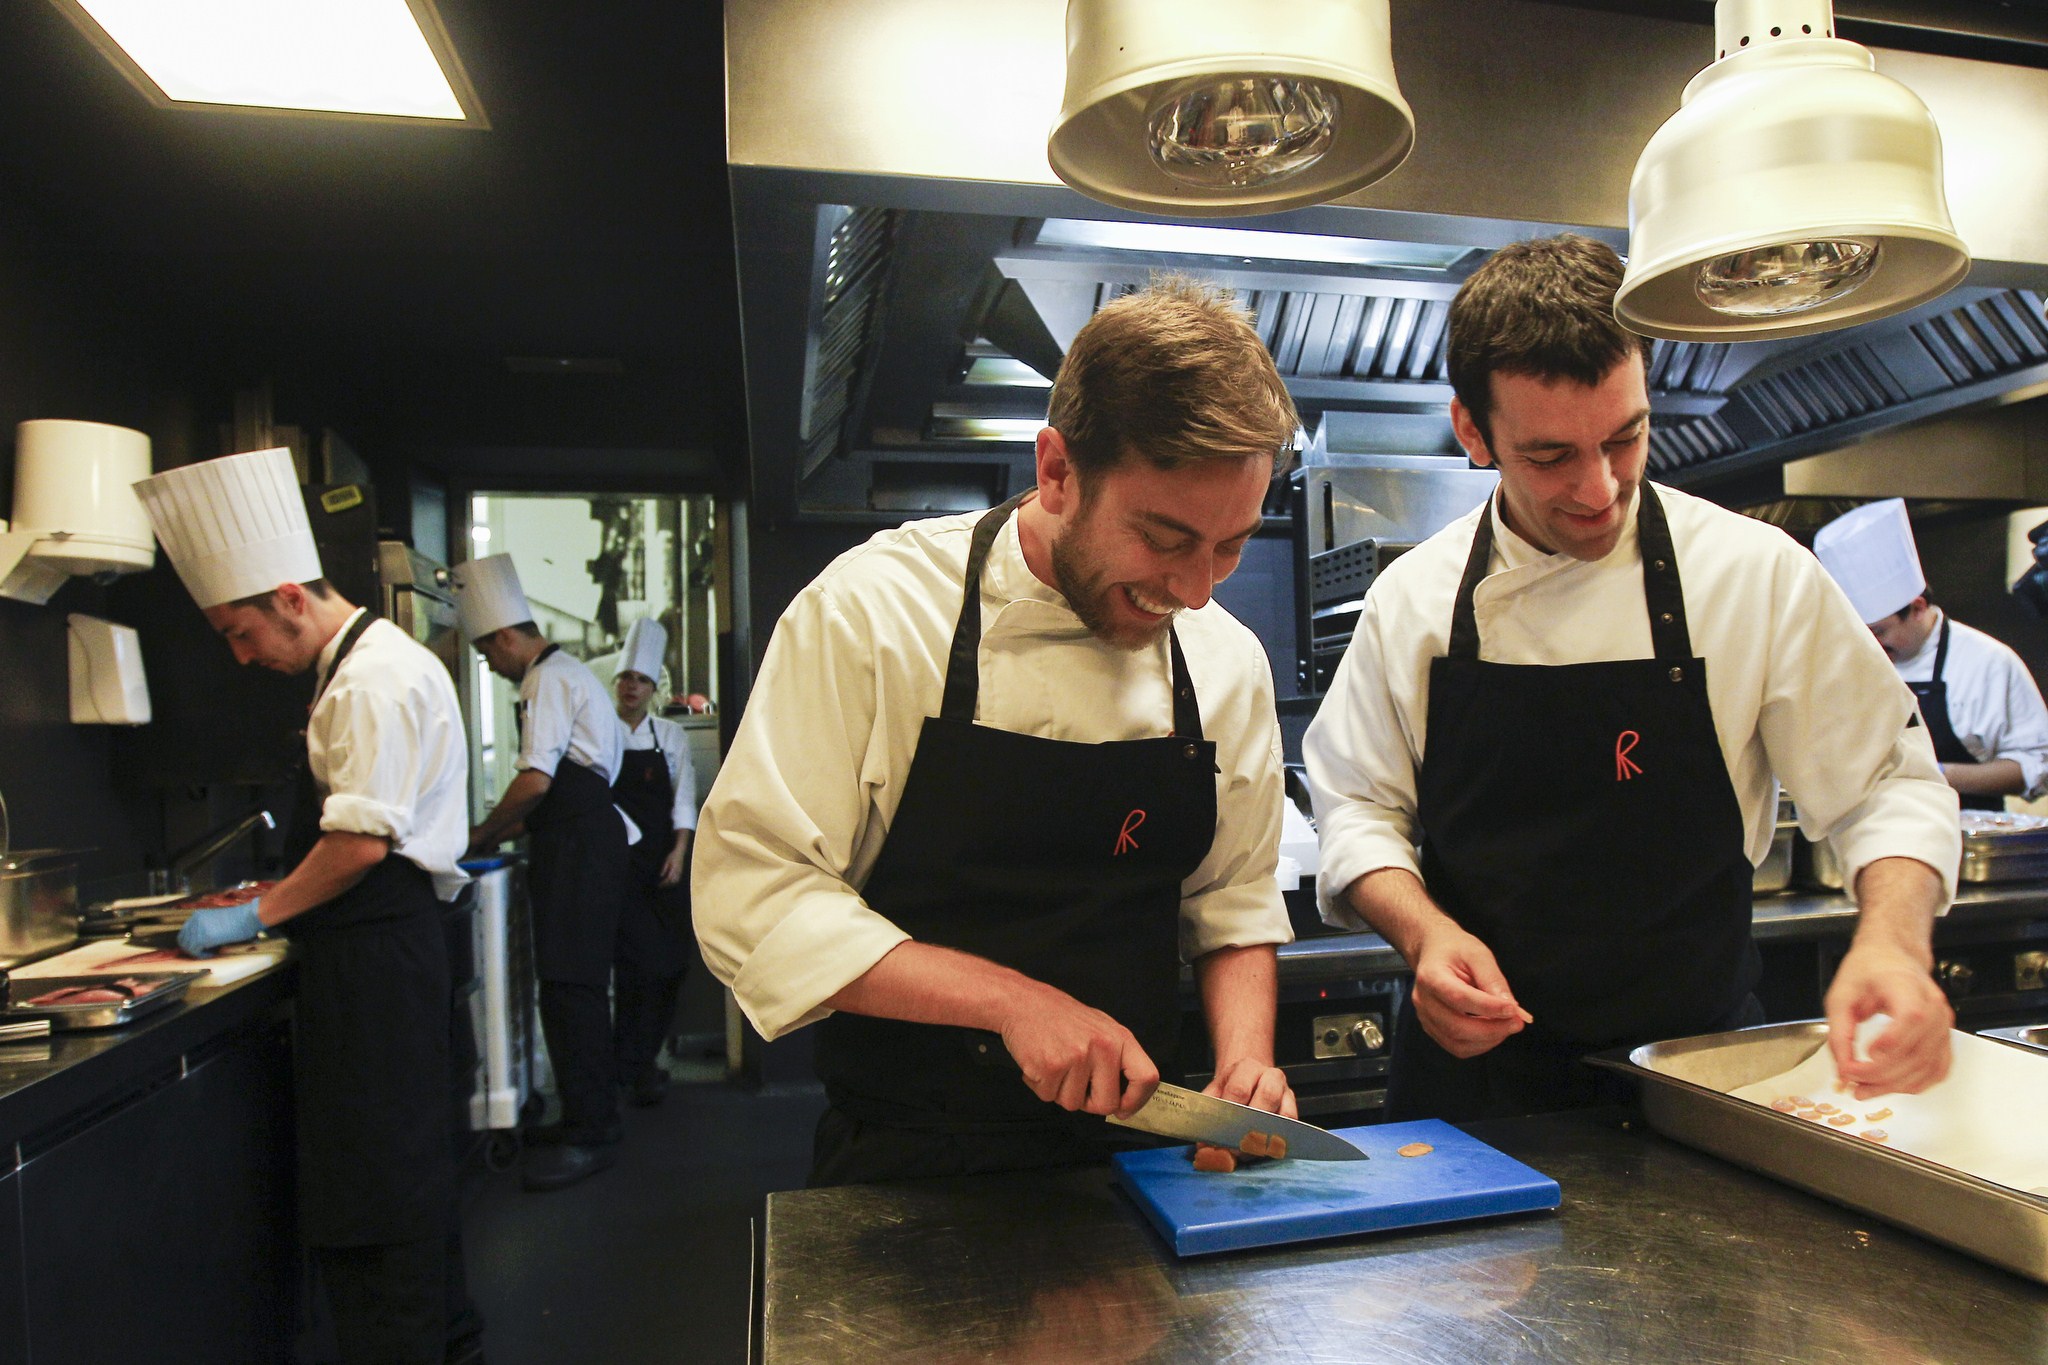 Chefs of the restaurant "El Celler de Can Roca" Spanish Nacho Baucells (L) and Argentinian Hernan Luchetti (R) work in the kitchen in Girona on June 2, 2015. Spain's "El Celler de Can Roca" was crowned the world's best restaurant on June 1, 2015 winning praise for the "collective genius" of the three brothers who run it. It was the second time the Girona eatery has topped the World's 50 Best Restaurant awards in London, after taking the number one spot in 2013.   AFP PHOTO/ QUIQUE GARCIA        (Photo credit should read QUIQUE GARCIA/AFP/Getty Images)